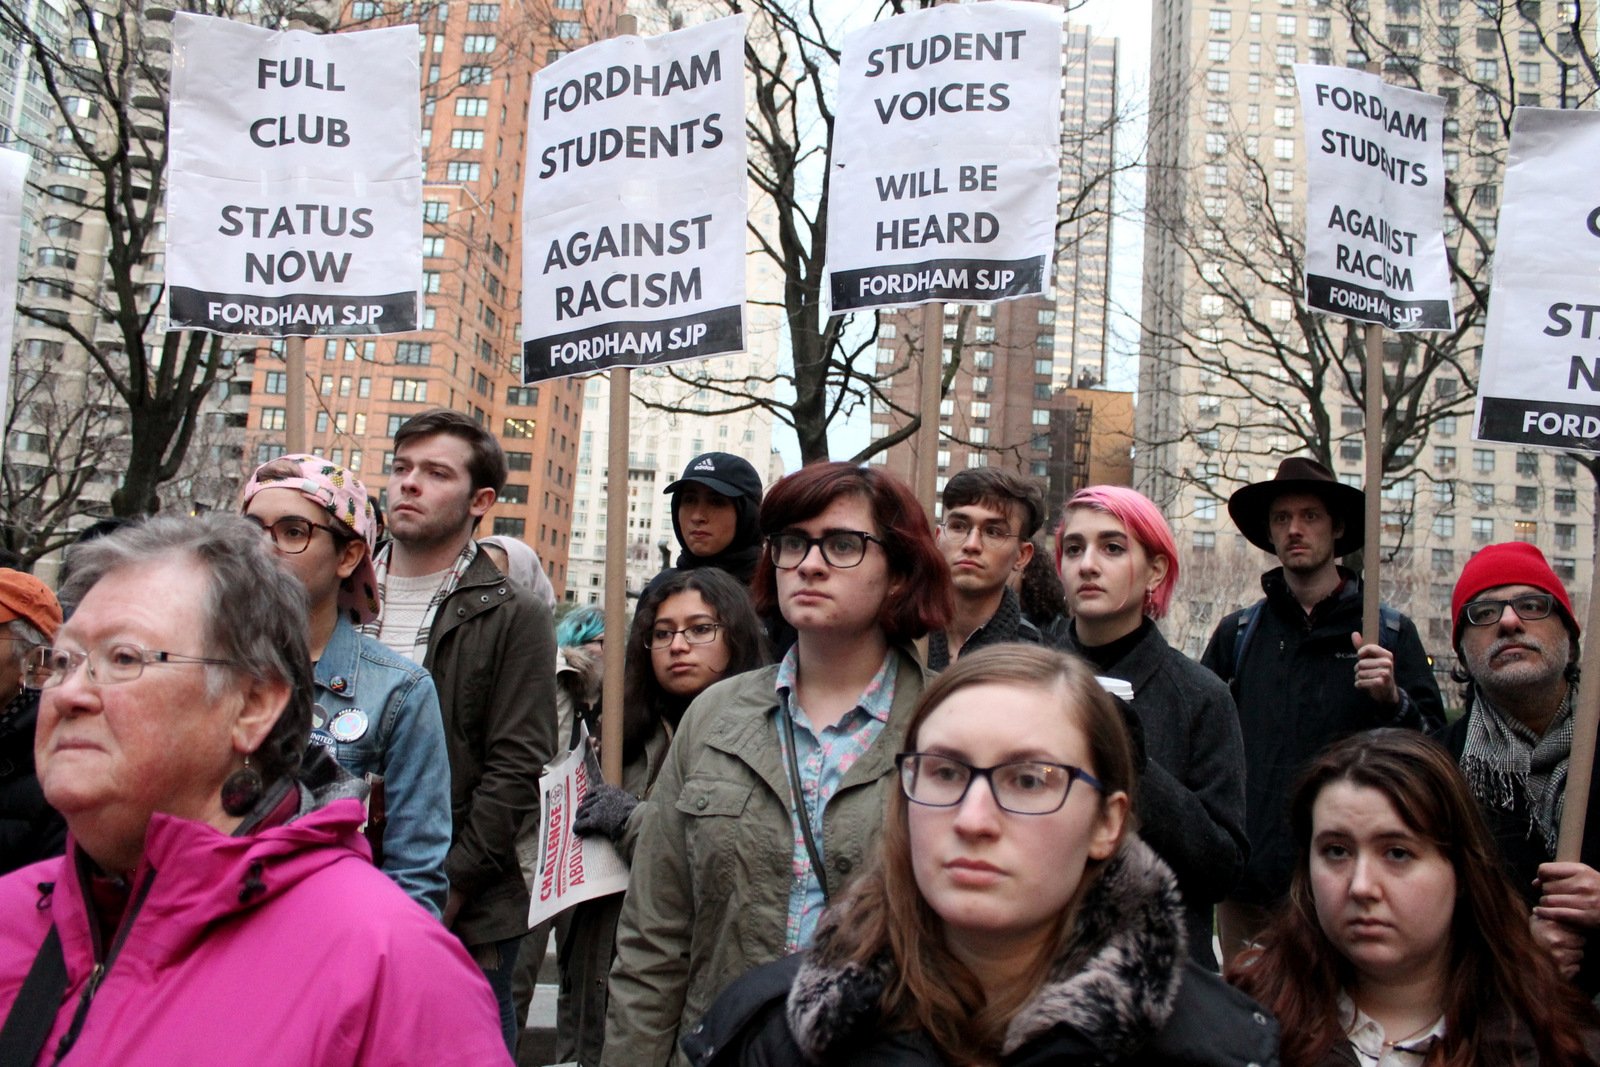 Supporters of Students for Justice in Palestine rallied on the Manhattan campus of Fordham University to protest a ban on the group by the school's administration, as well as a threat of disciplinary action against one of its leaders, Sapphira Lurie, by Fordham Dean of Students Keith Eldredge. (Photo by Joe Catron/flickr/cc)